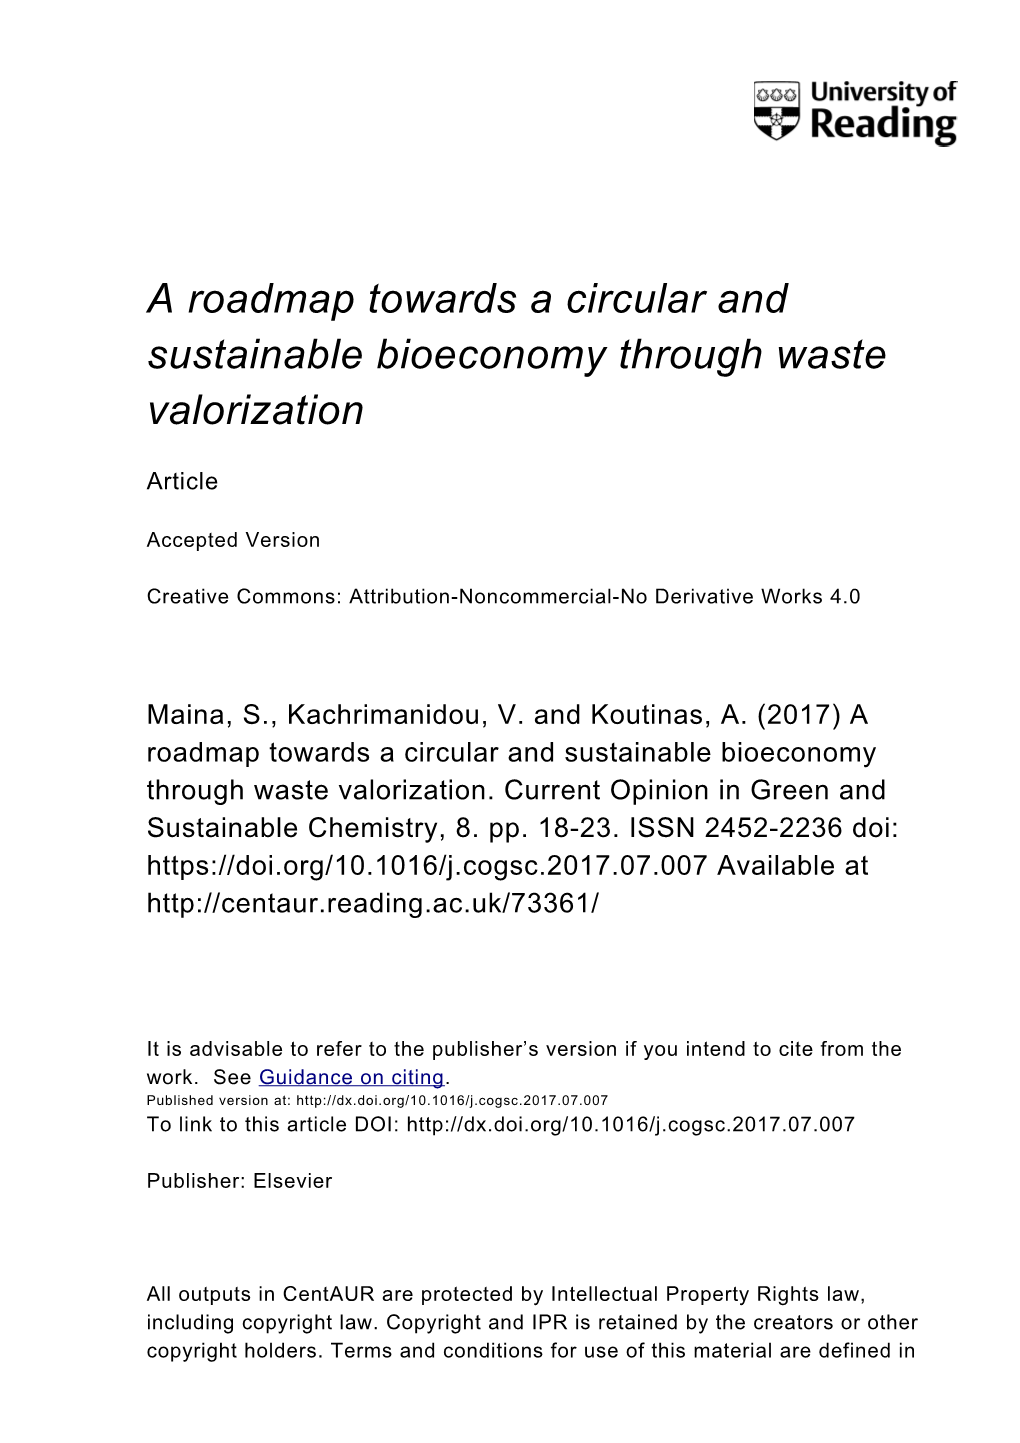 A Roadmap Towards a Circular and Sustainable Bioeconomy Through Waste Valorization